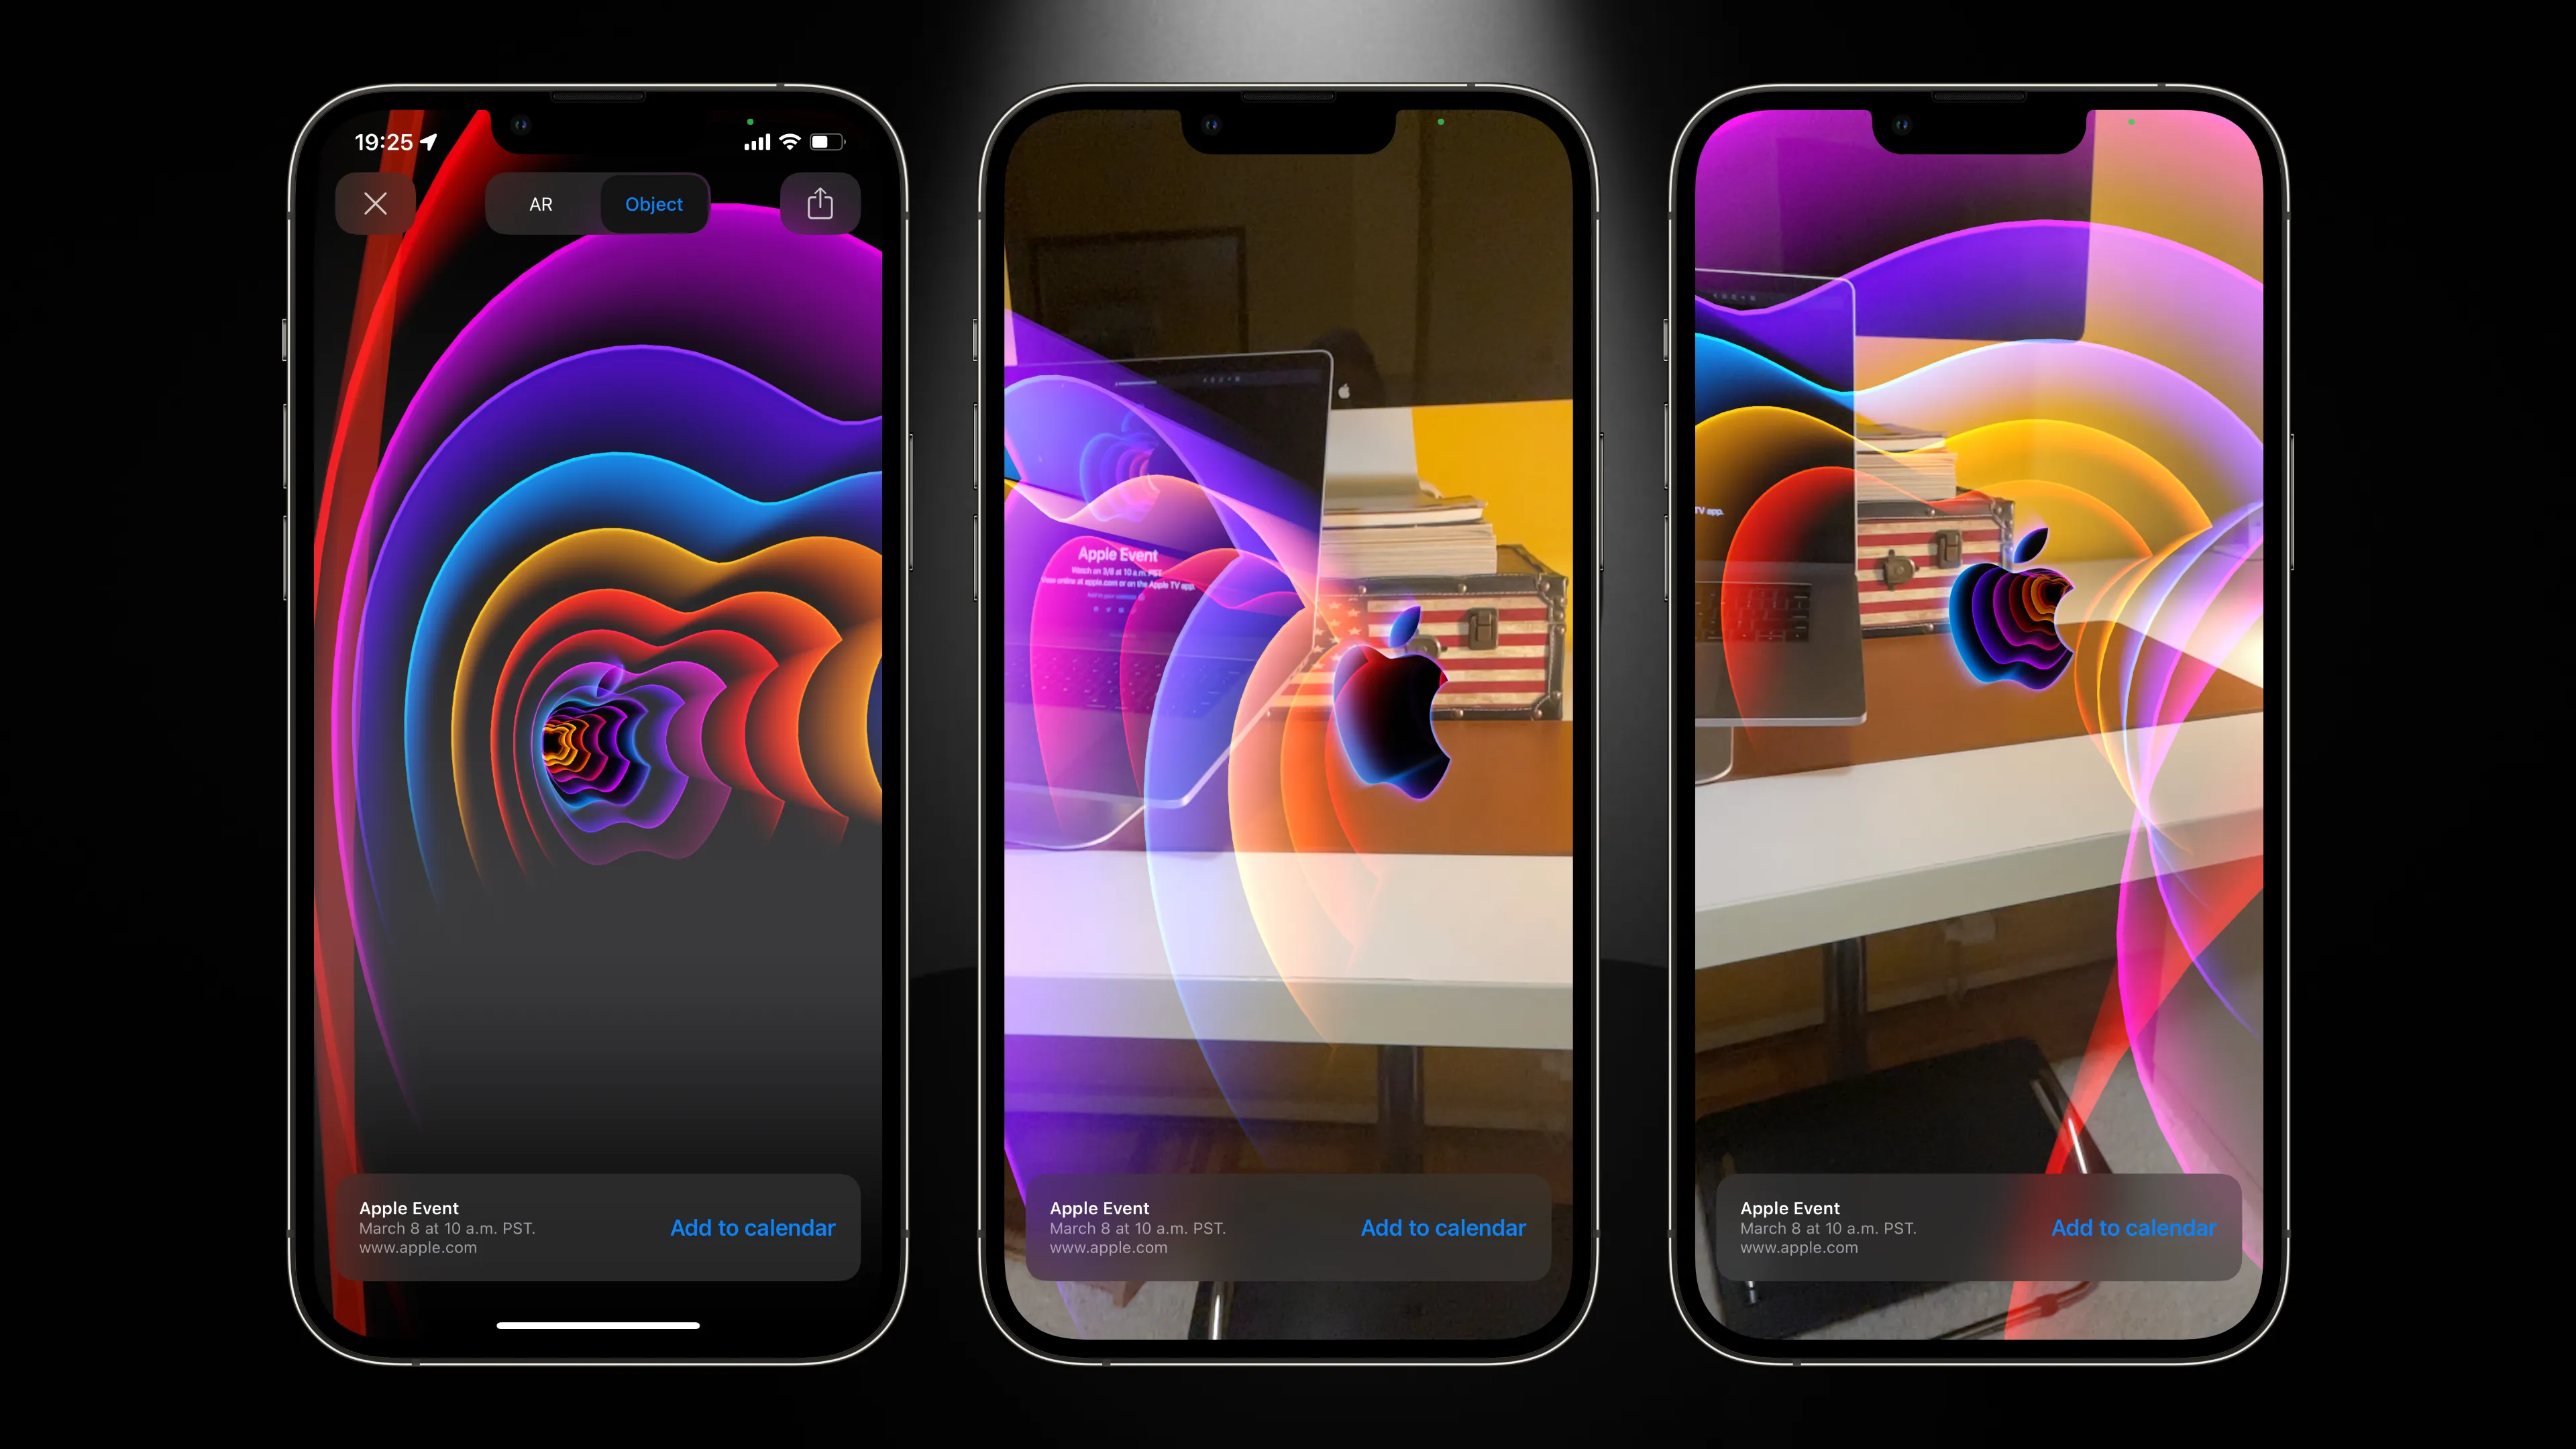 Three device screenshots showing a morphing Apple logo for the March 2022 event running on iPhone in augmented reality